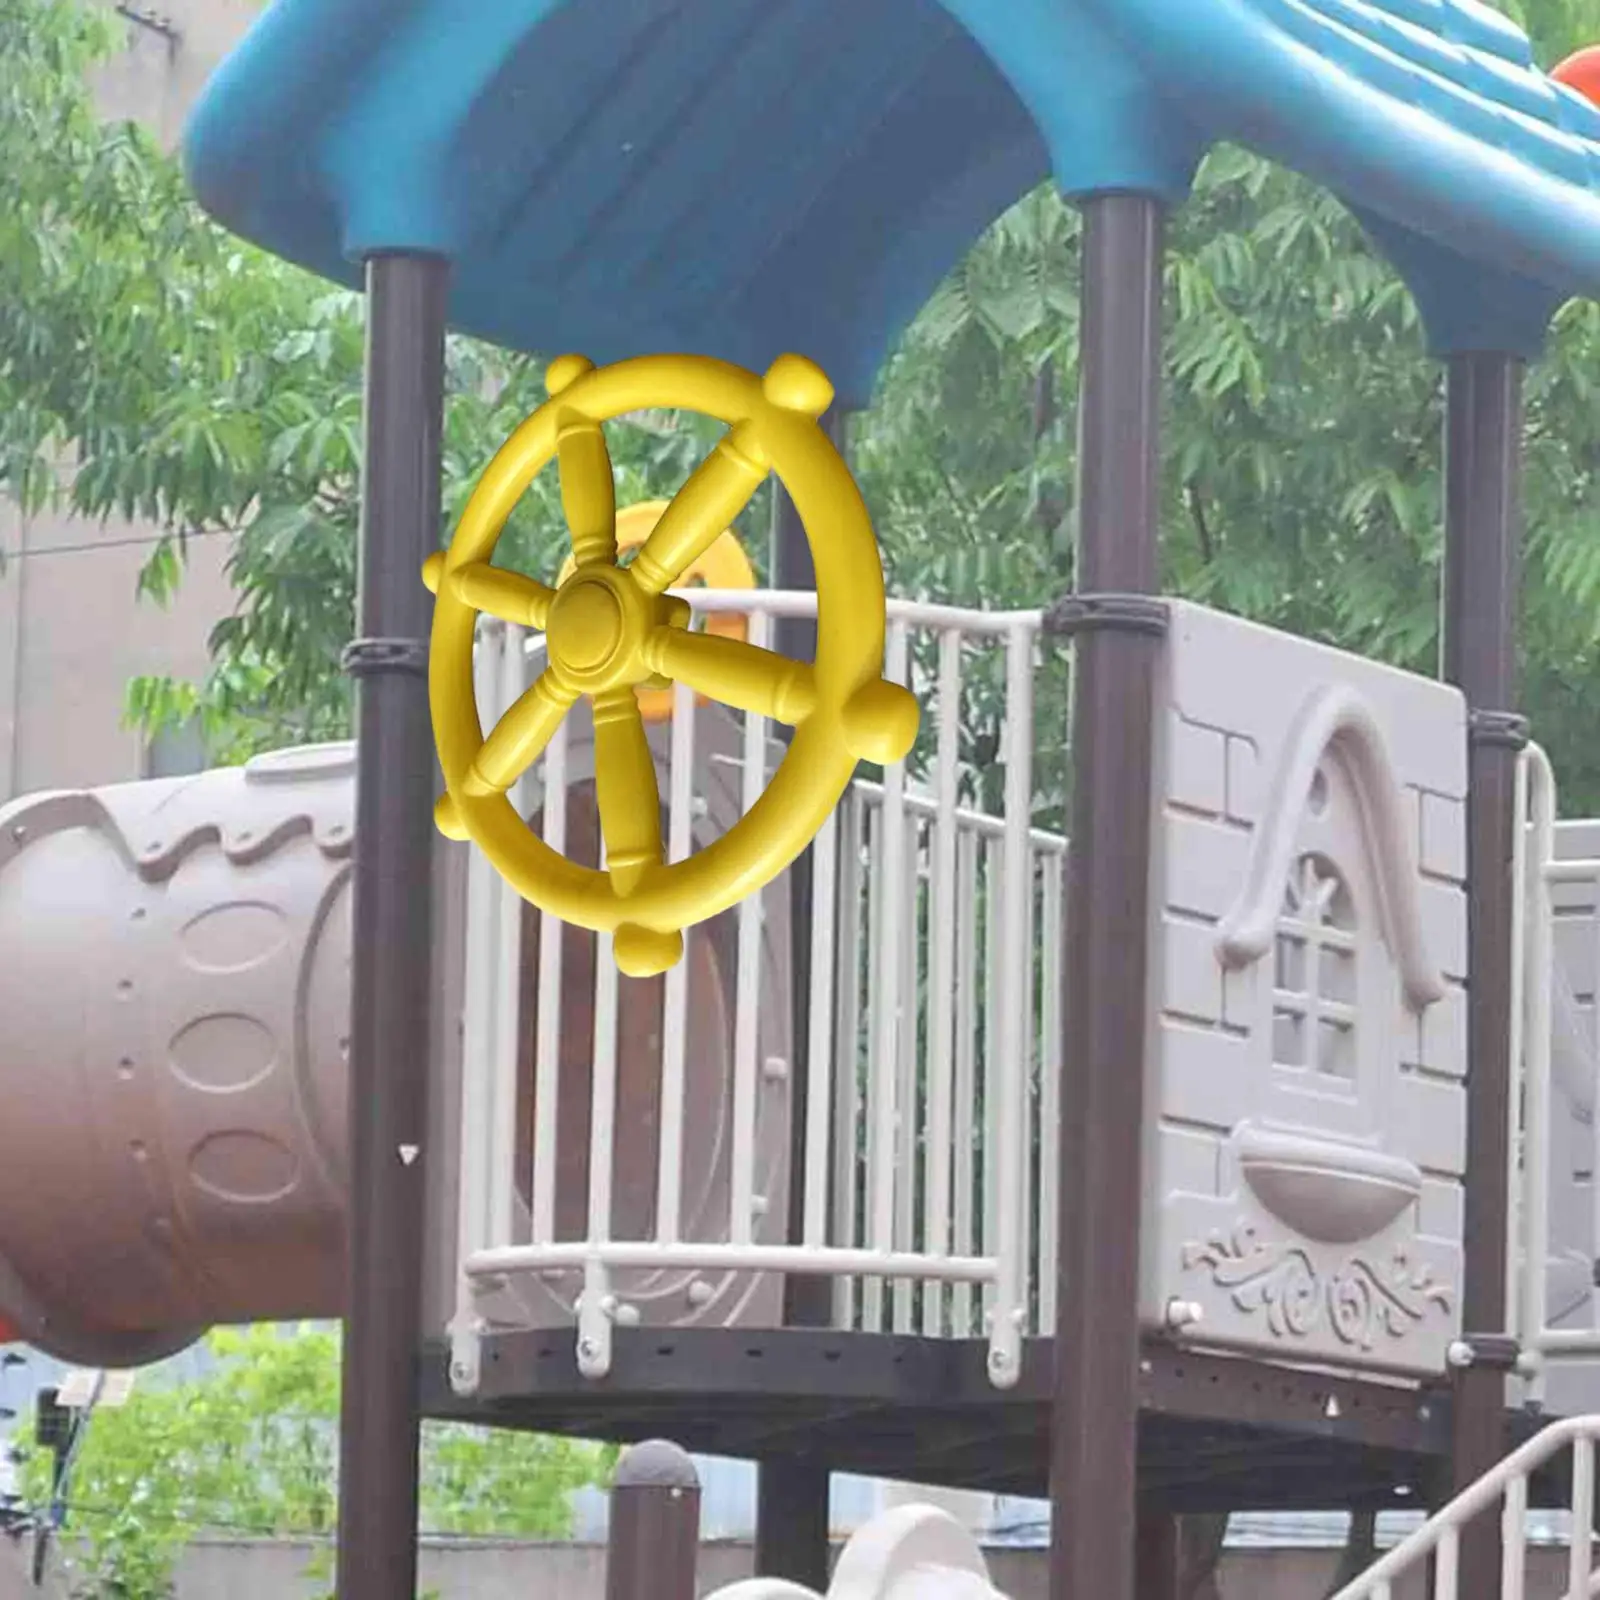 Pirate Ship Wheel Kids Steering Wheel Toy for Play House Swingset Tree House